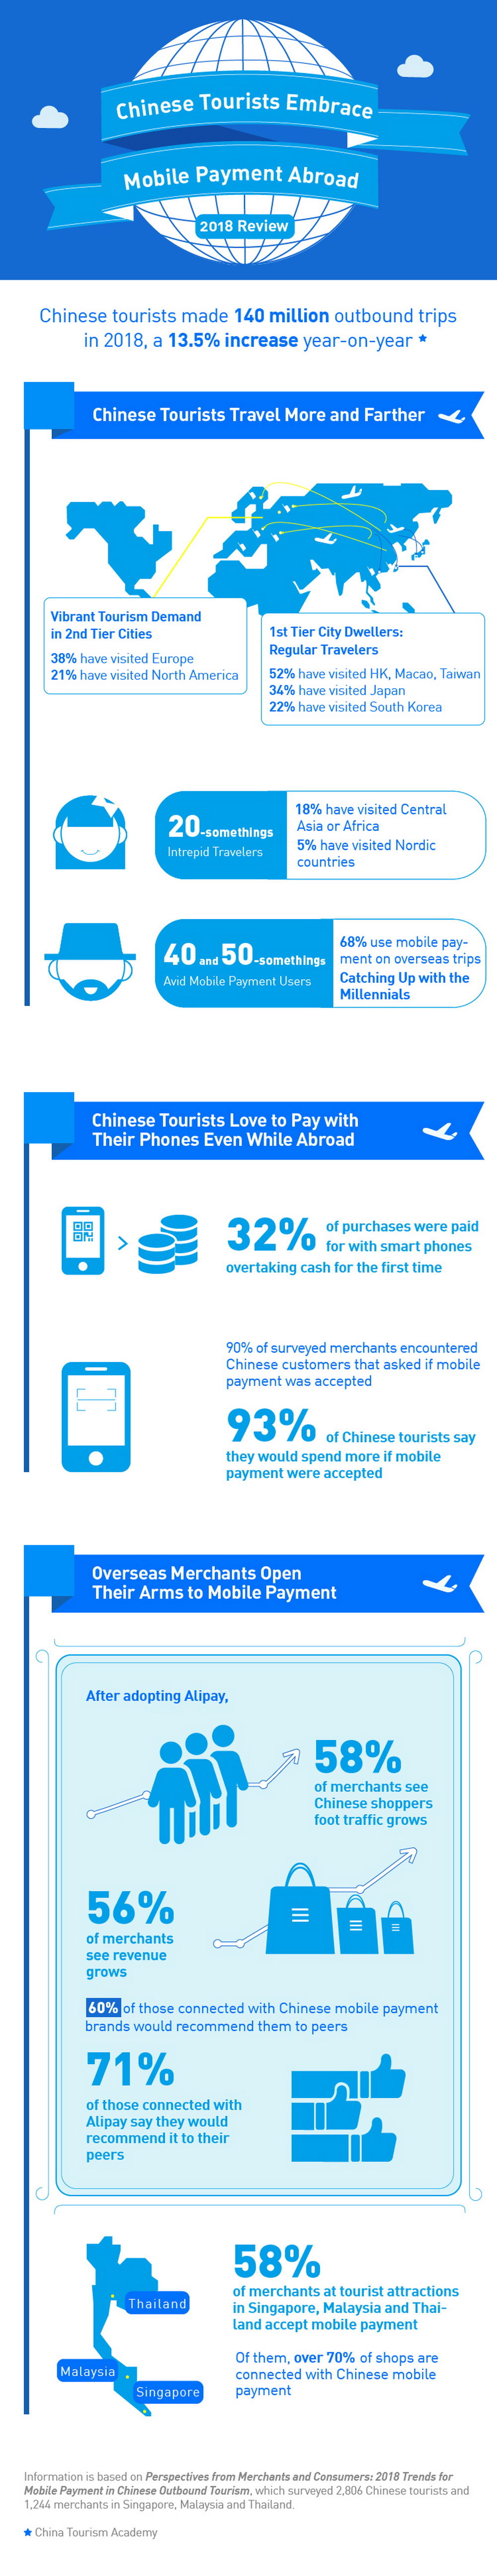 Alipay Chinese outbound tourism infographic